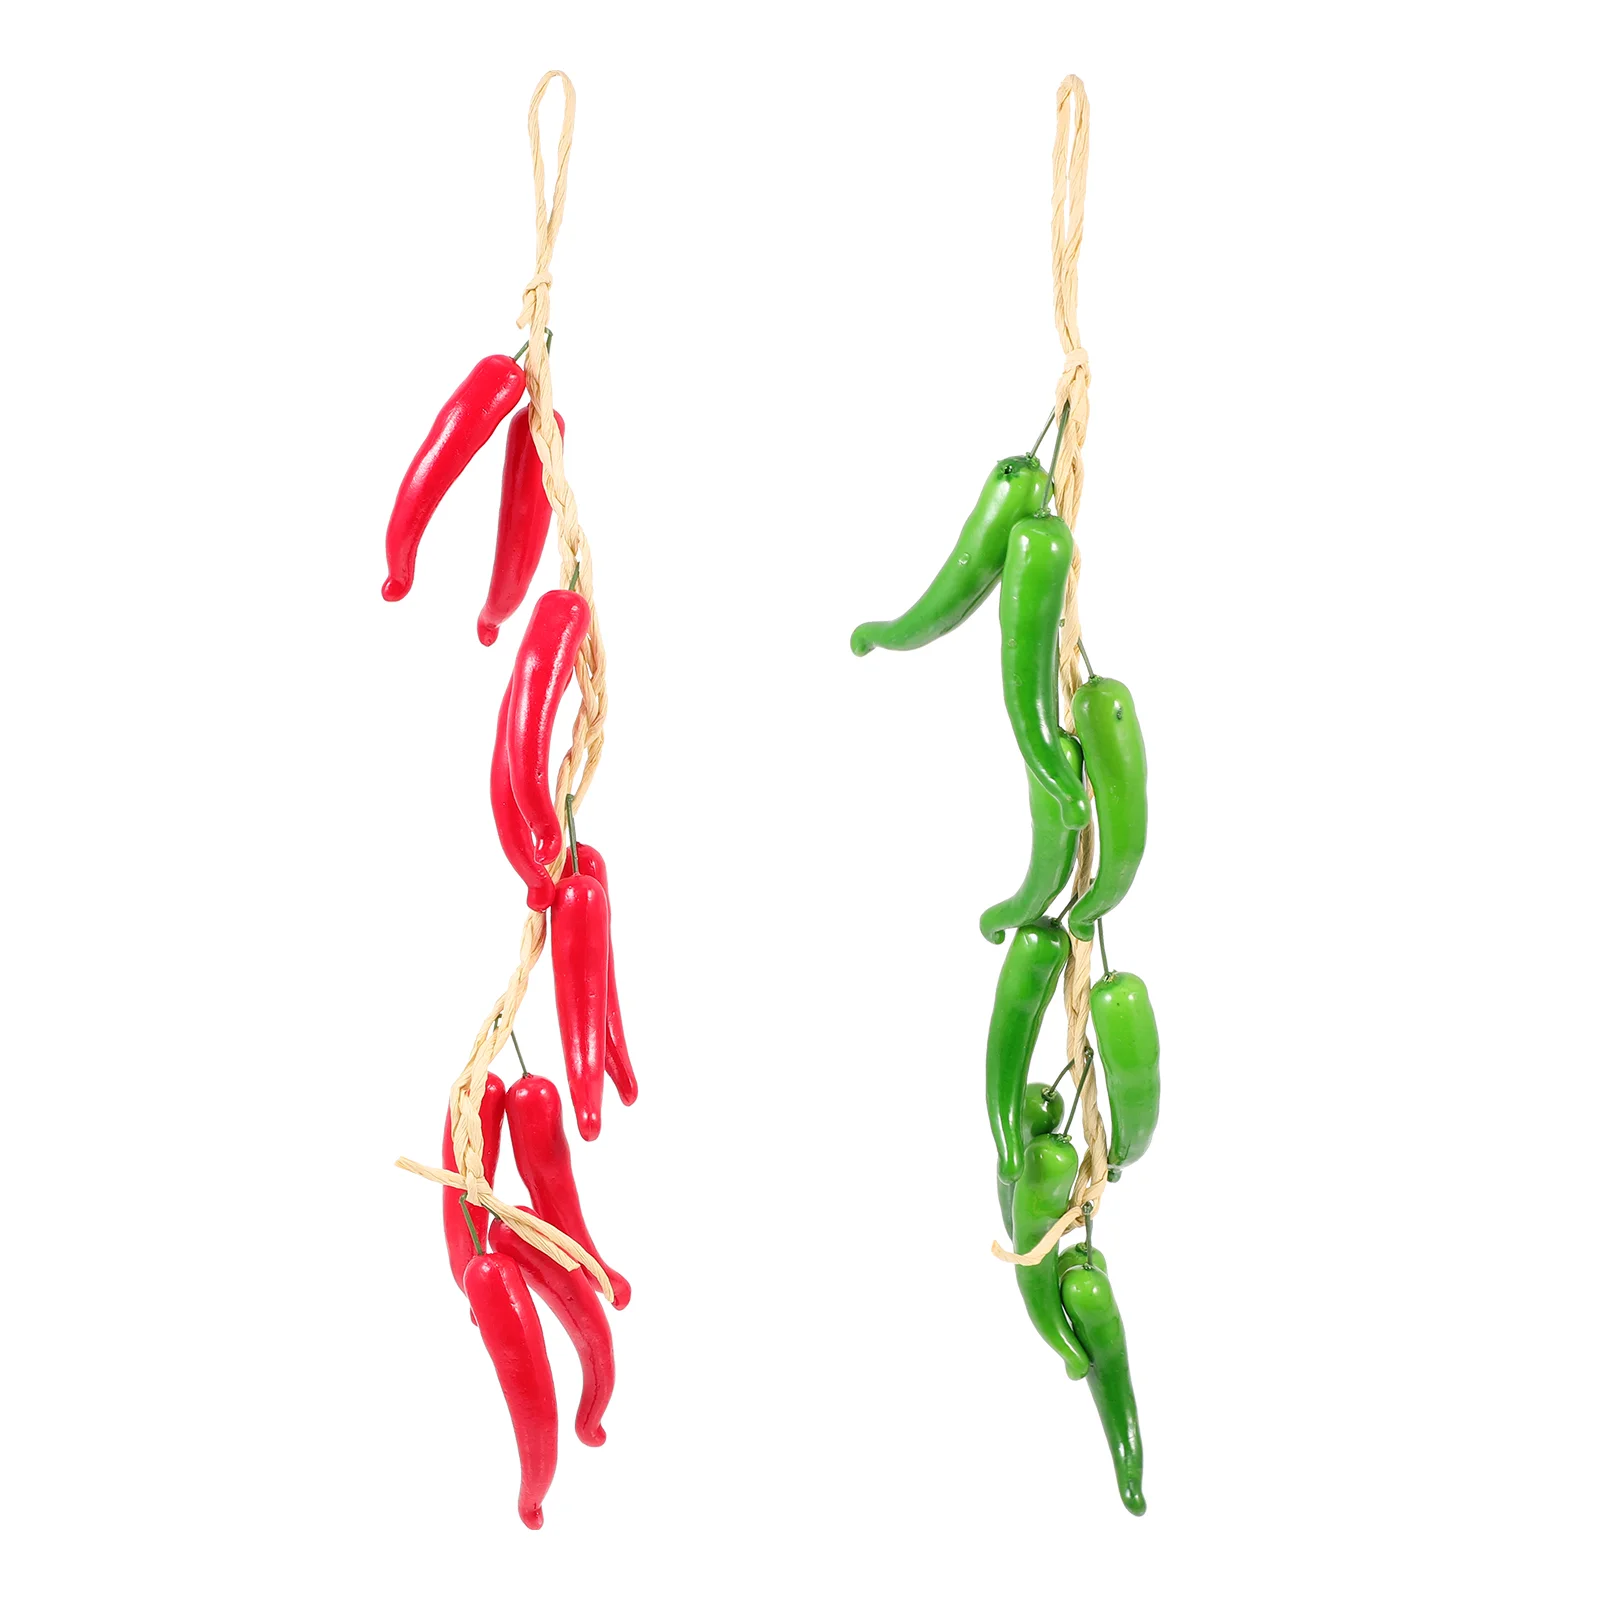 

Pepper Artificial Chili Fake Vegetable Hanging String Red Peppers Lifelike Decor Strings Hot Fruit Garland Ornament Toy Food